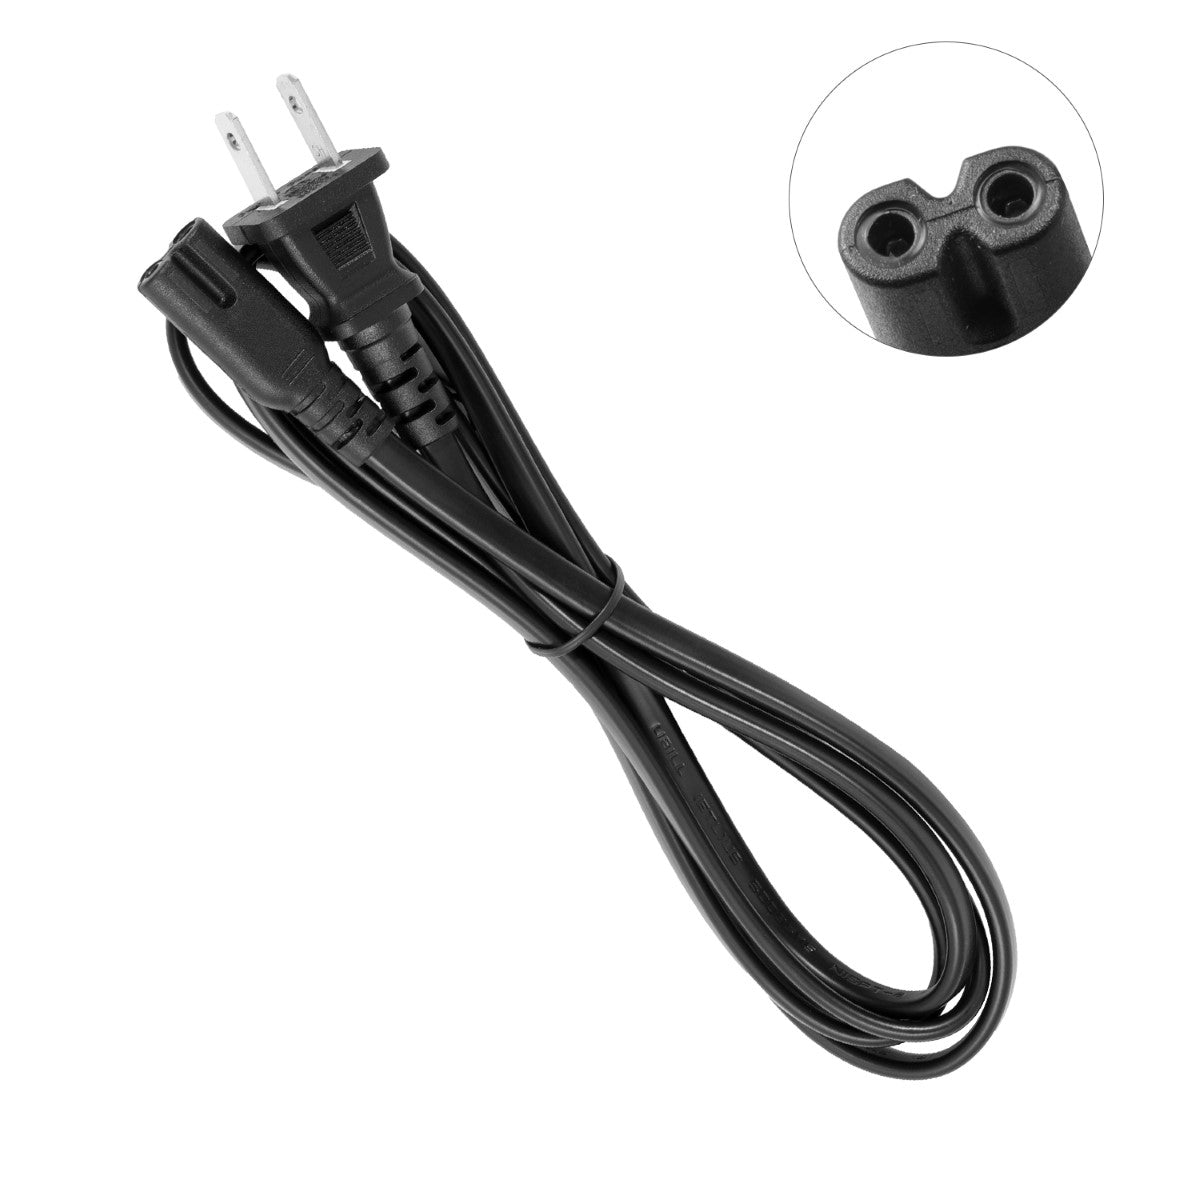 Power Cord for HP ENVY 4512 e-All-in-One Printer.